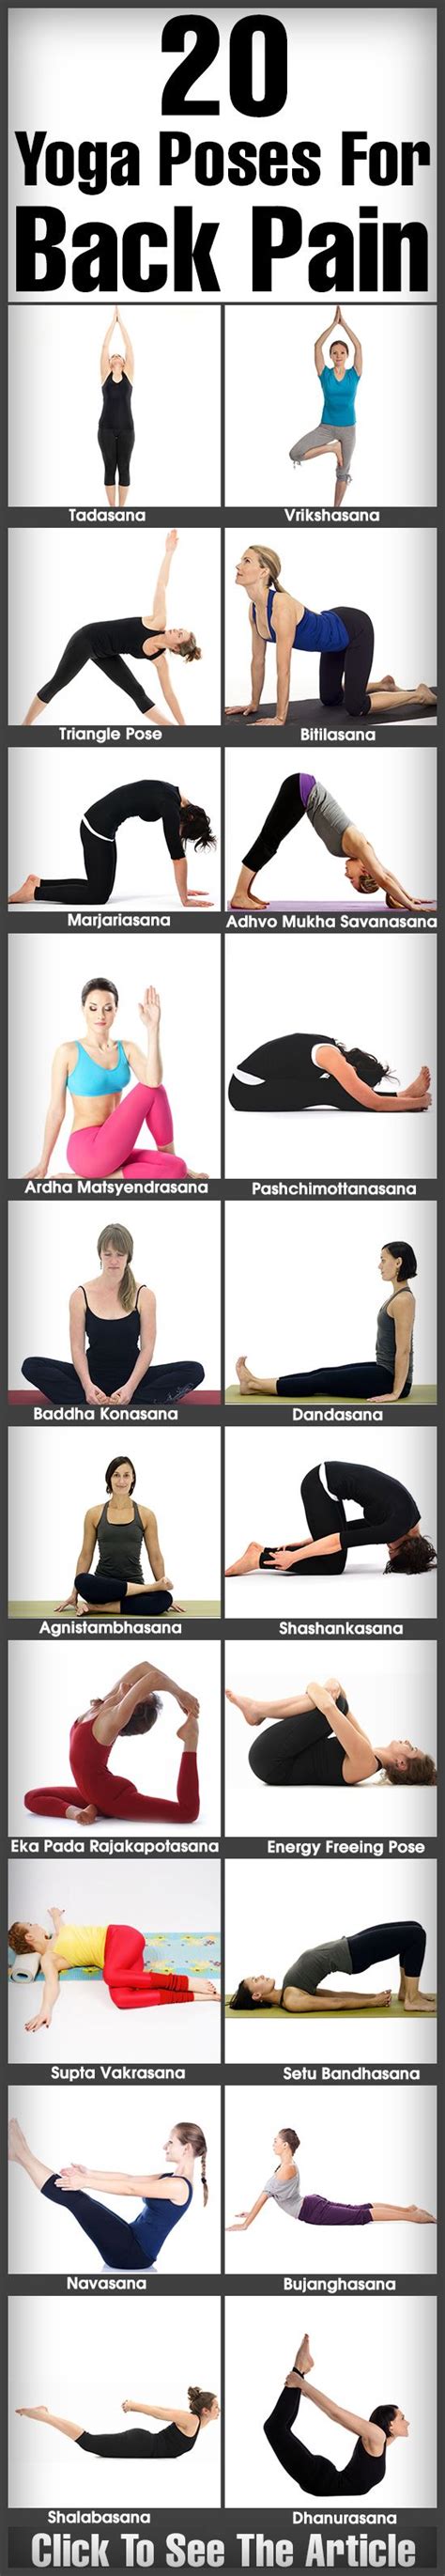 20 Easy Yoga Asanas That Will Cure Your Back Pain Quickly